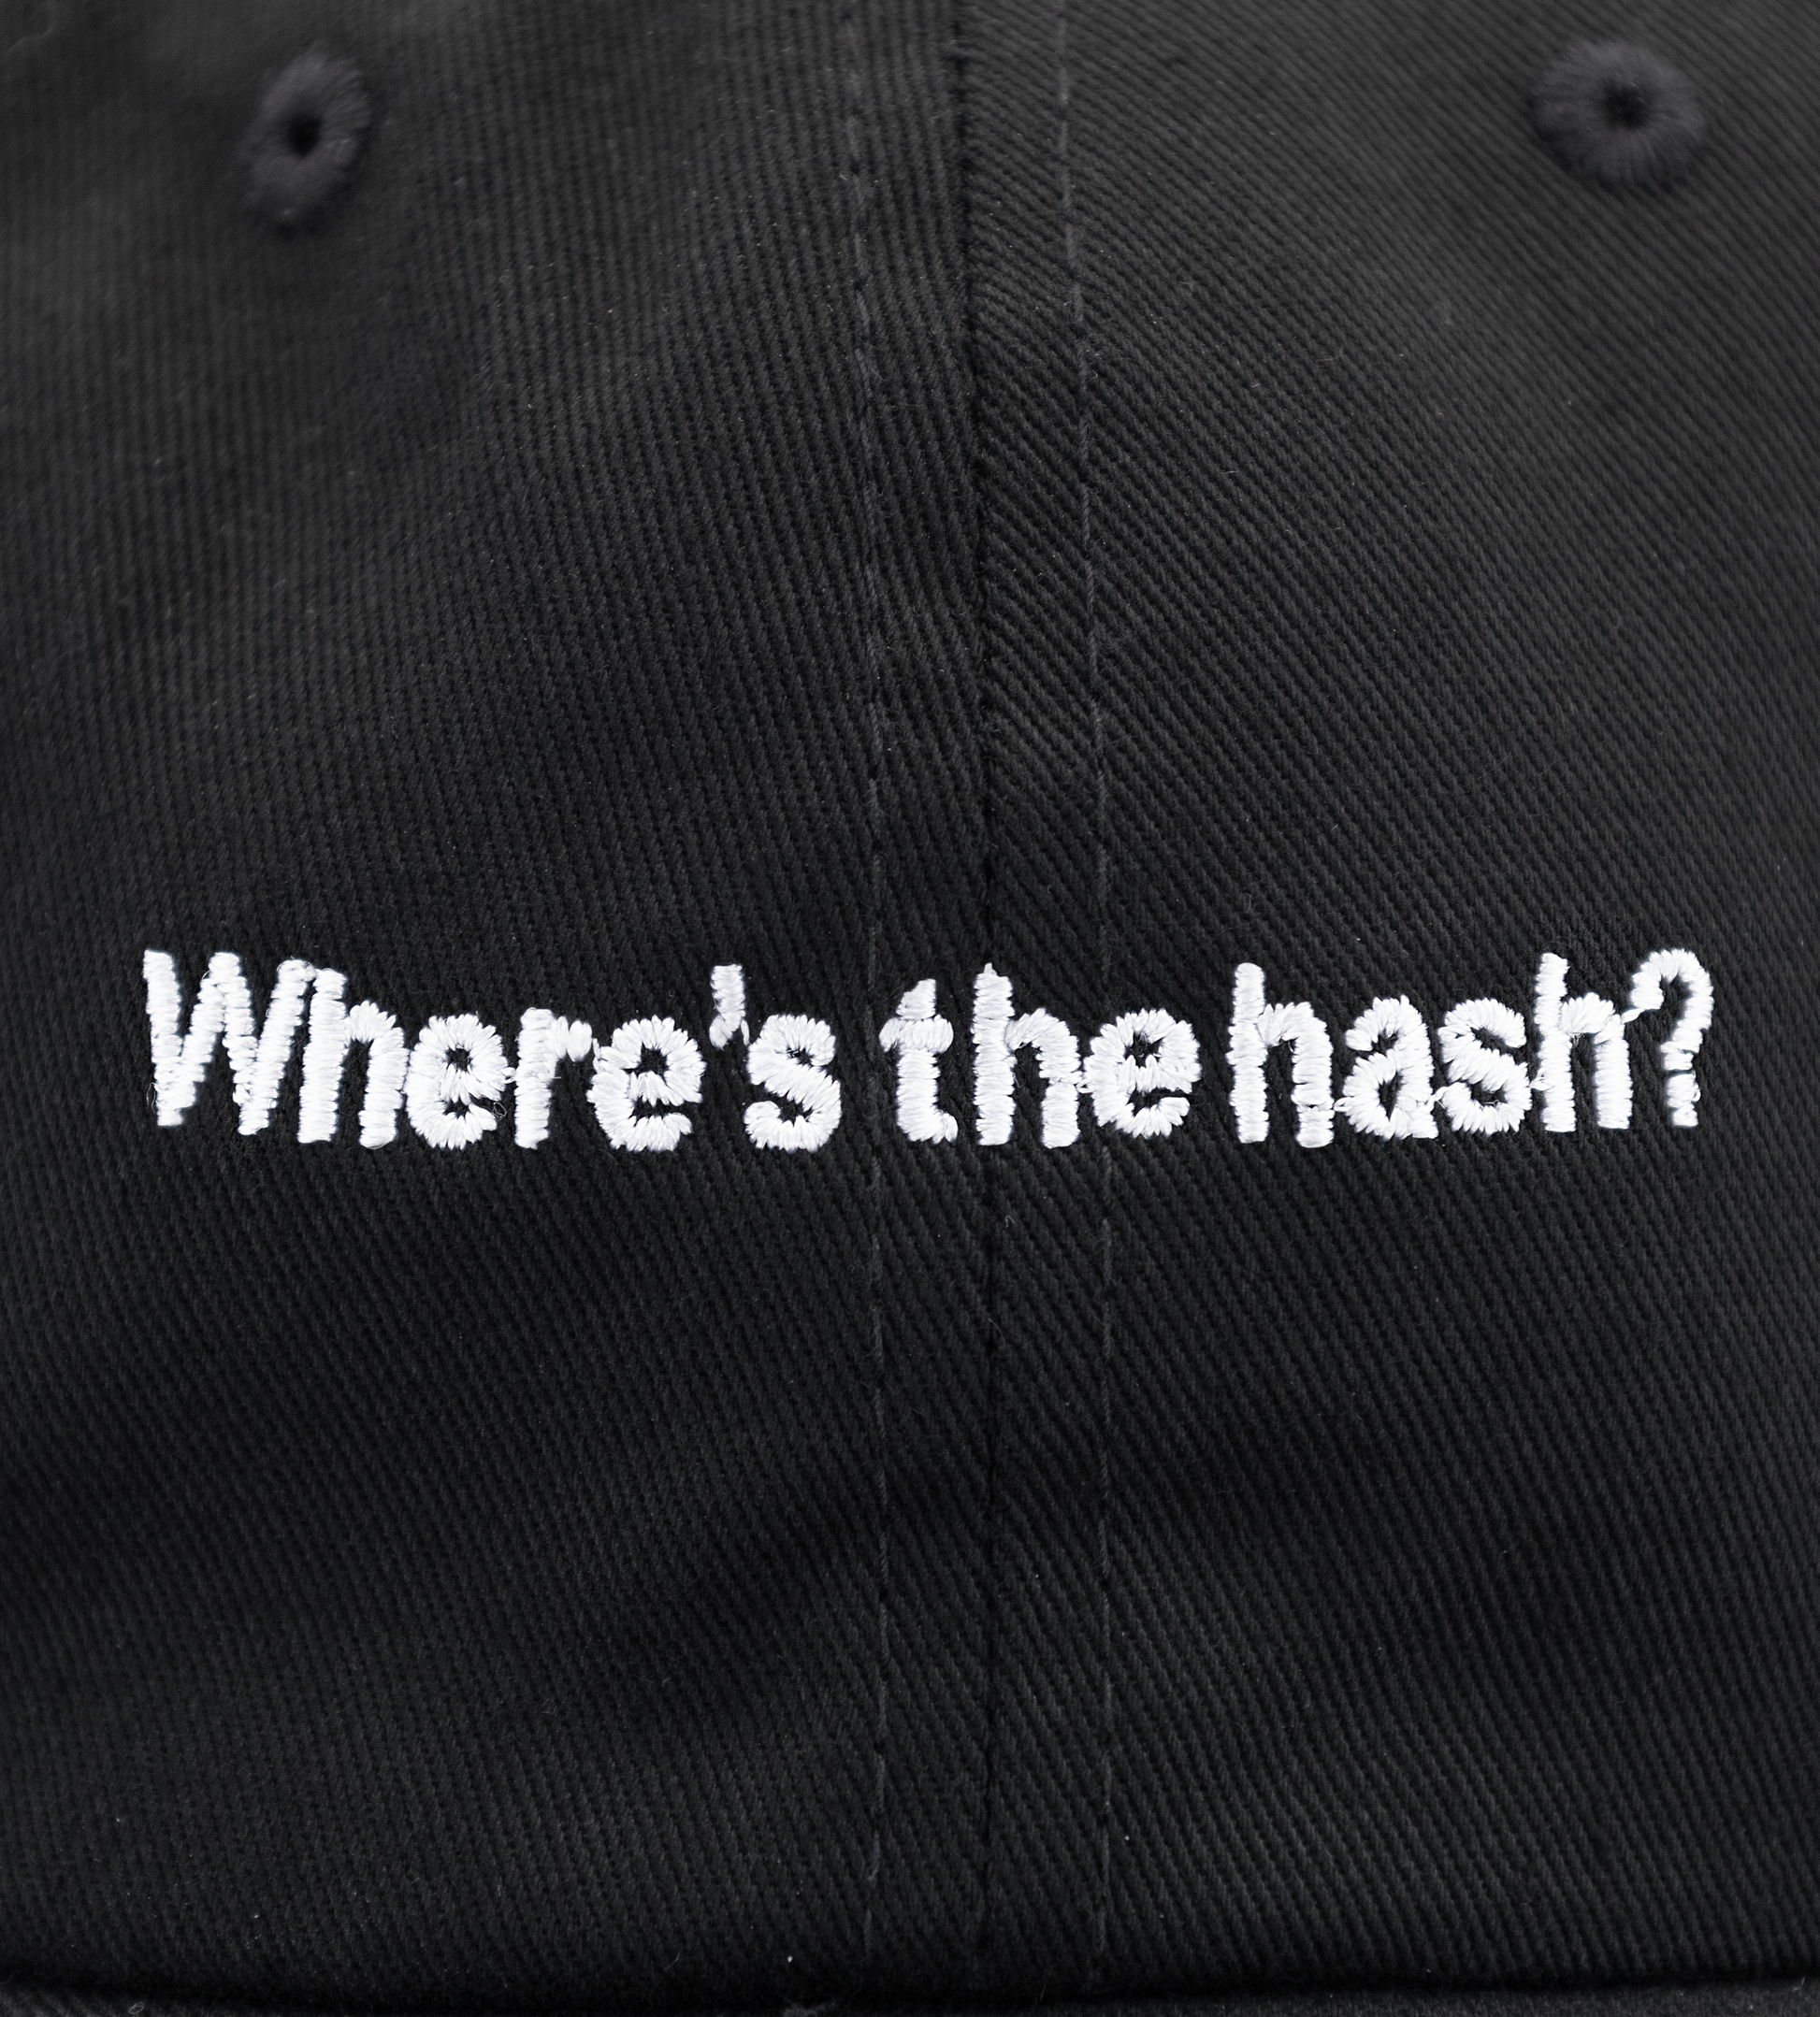 Close up shot of "Where's the hash?" text on black hat with white logo